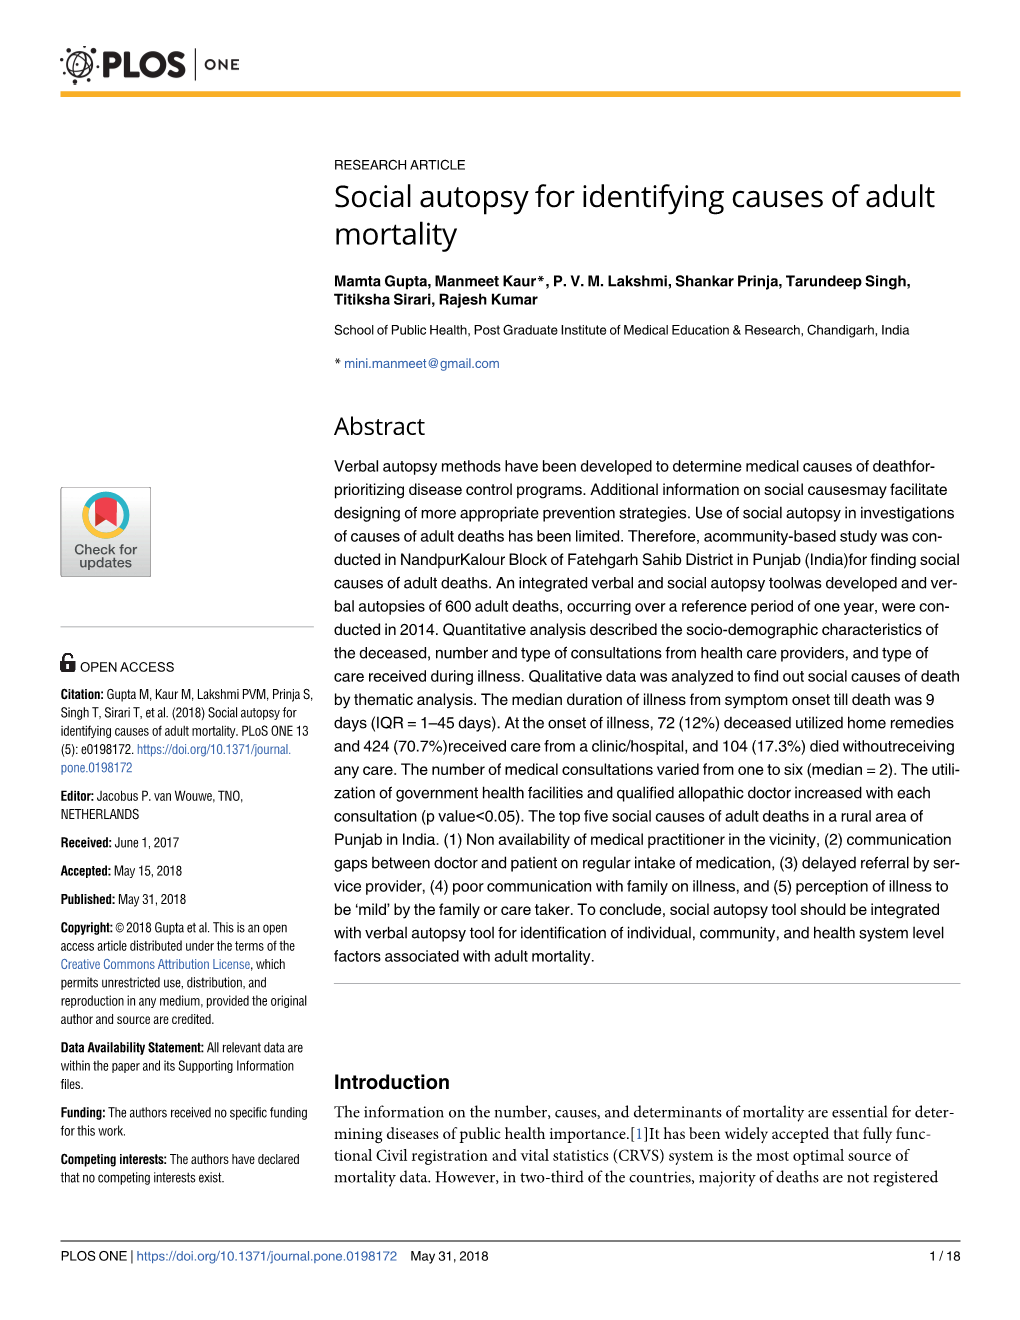 Social Autopsy for Identifying Causes of Adult Mortality